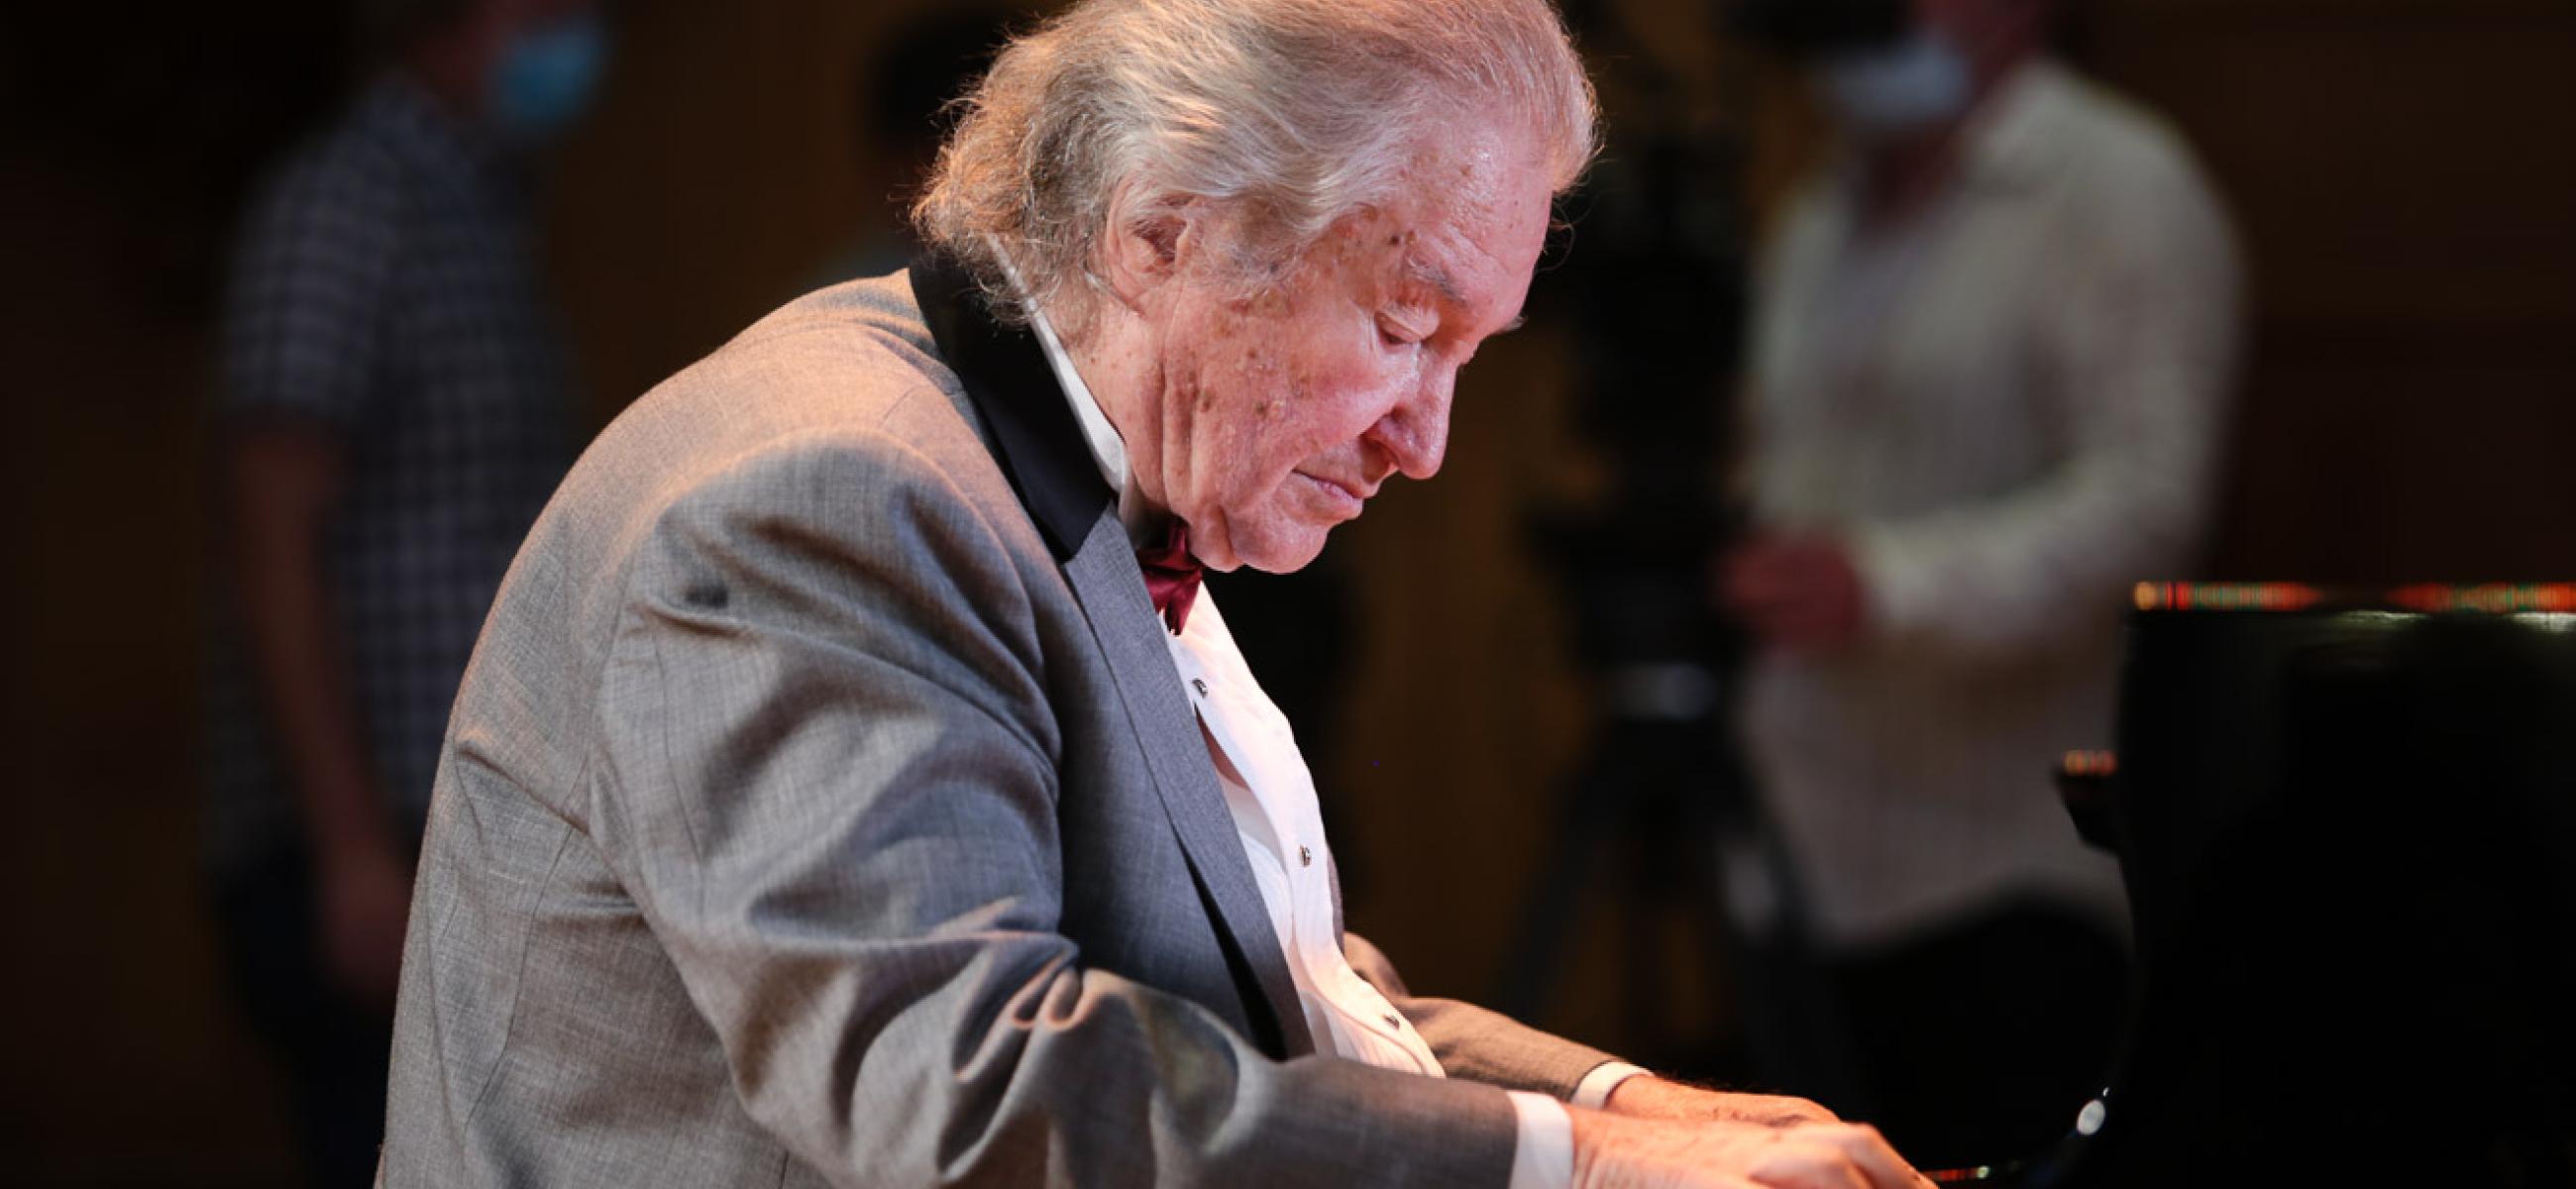 Mikhail Voskresensky in a gray suit, appears very focused while playing a piano.